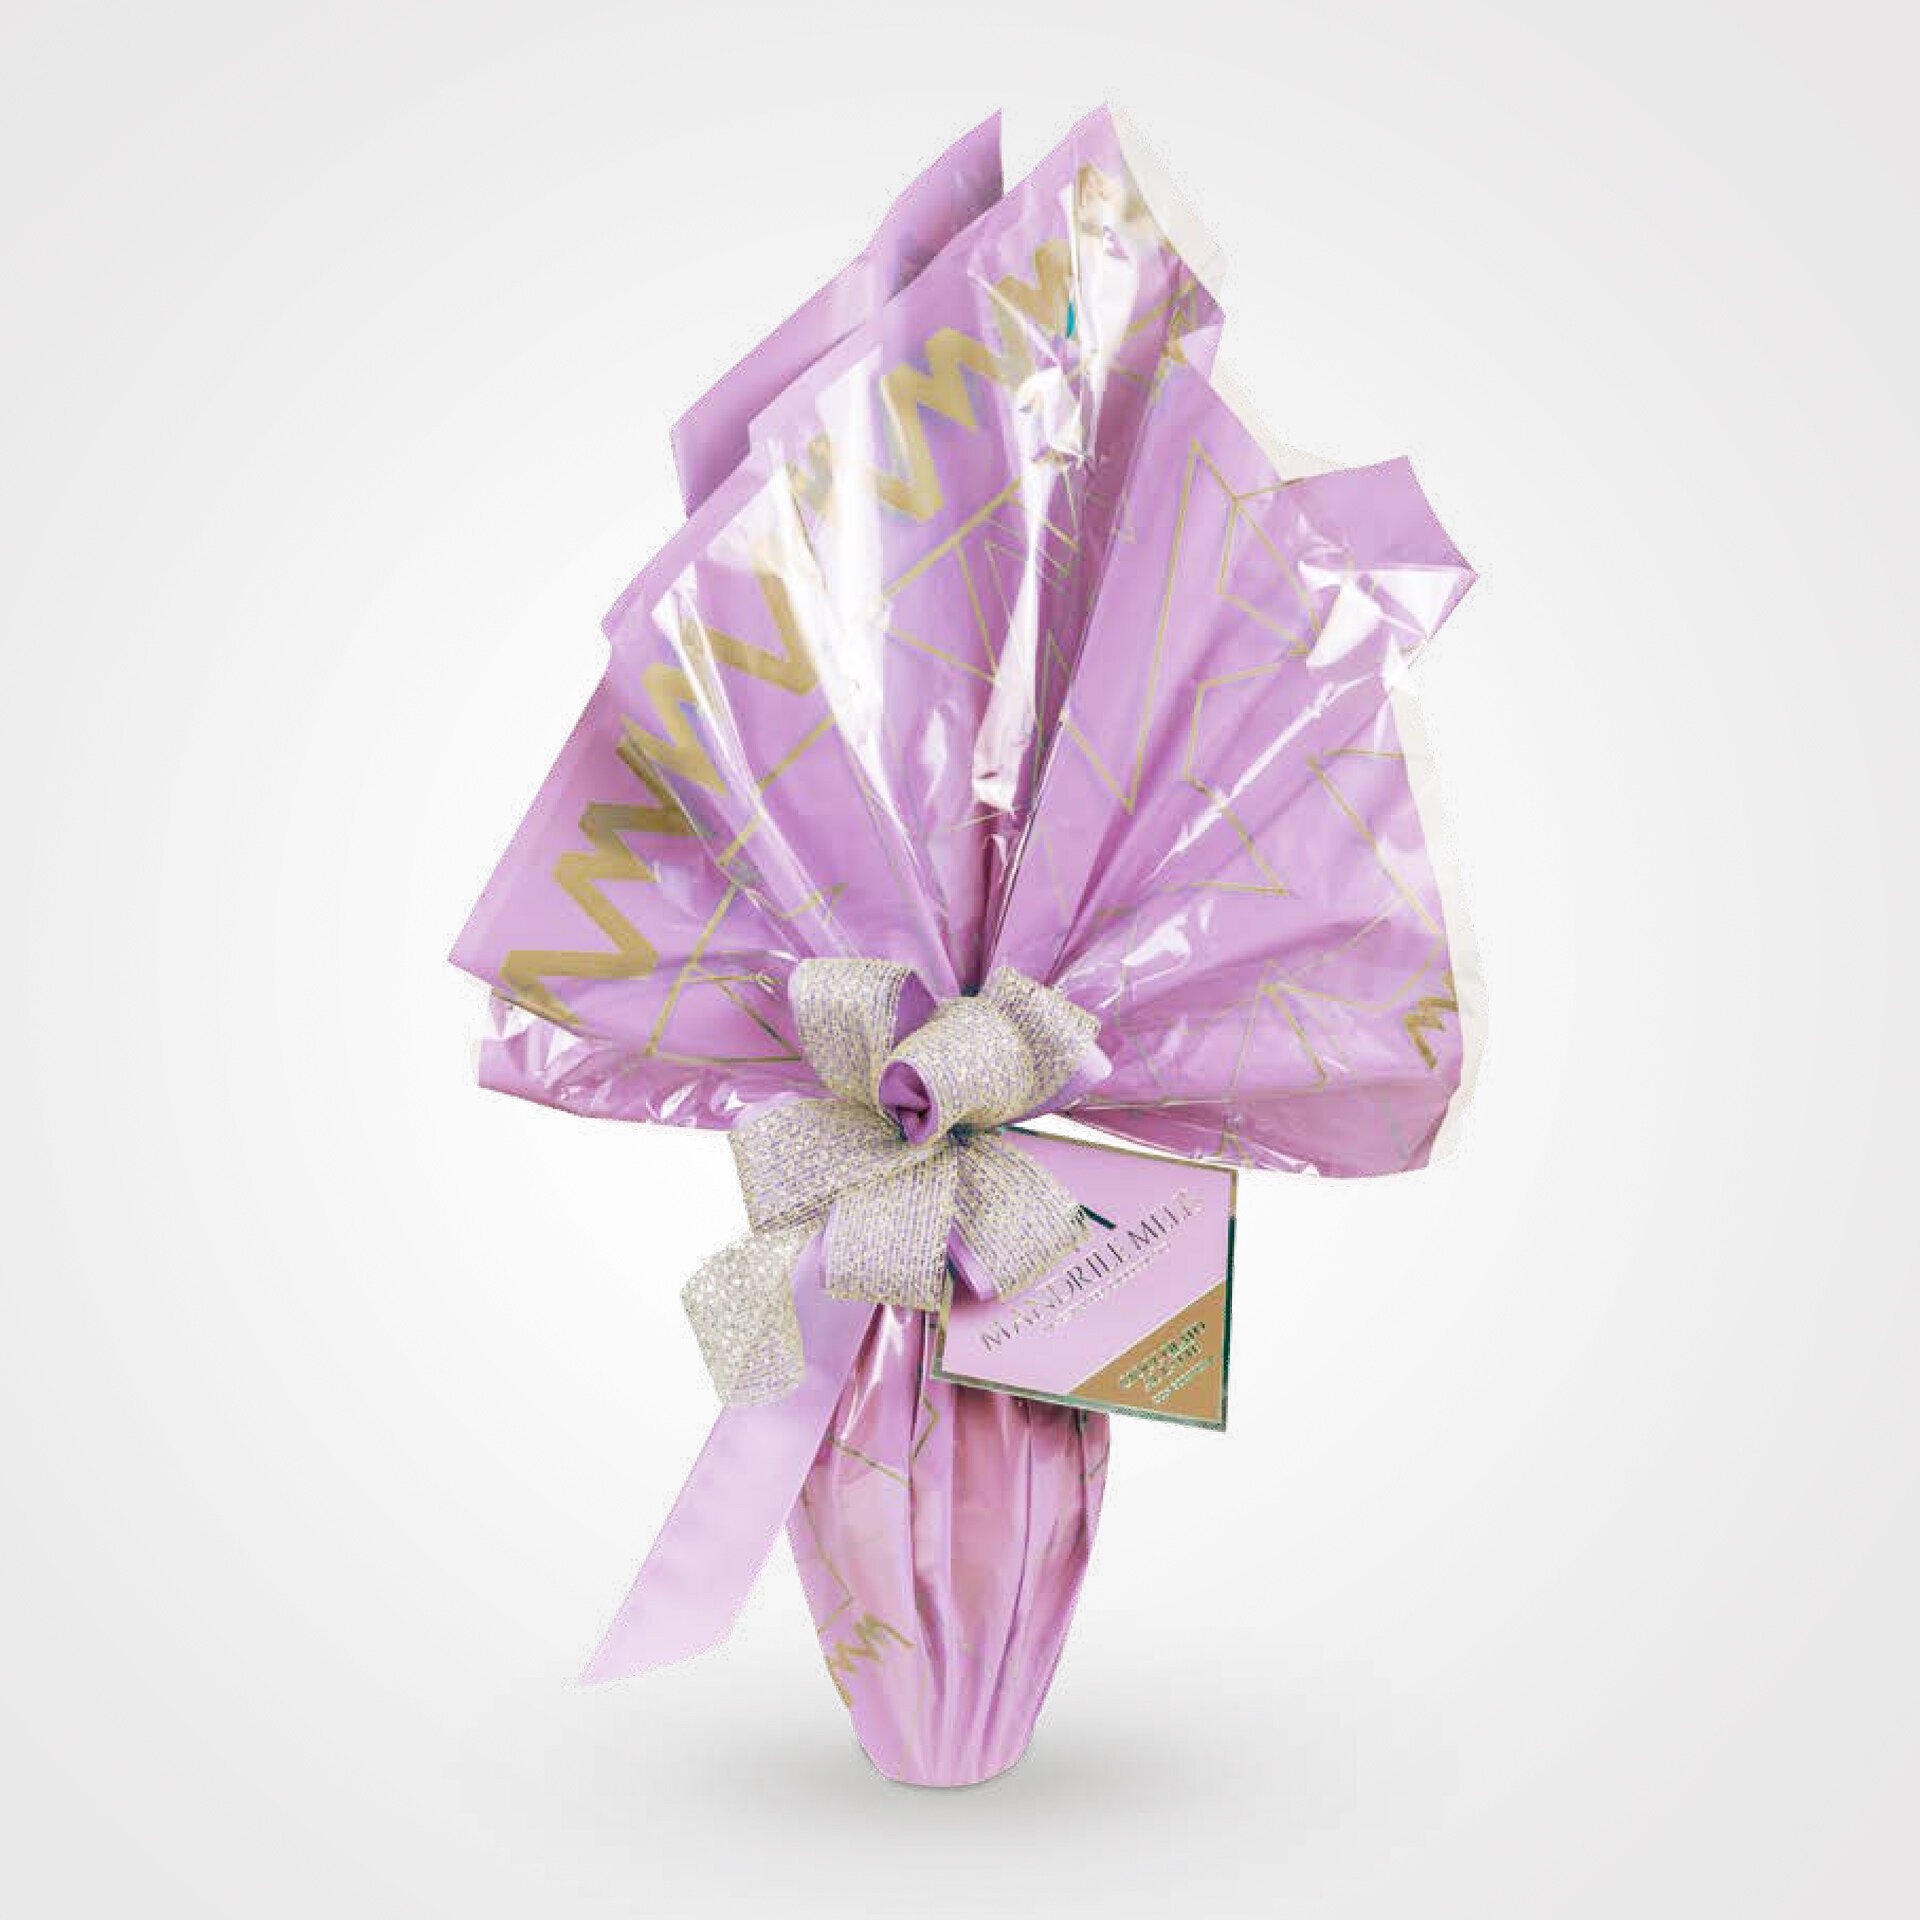 Milk Chocolate Egg lilac wrapping